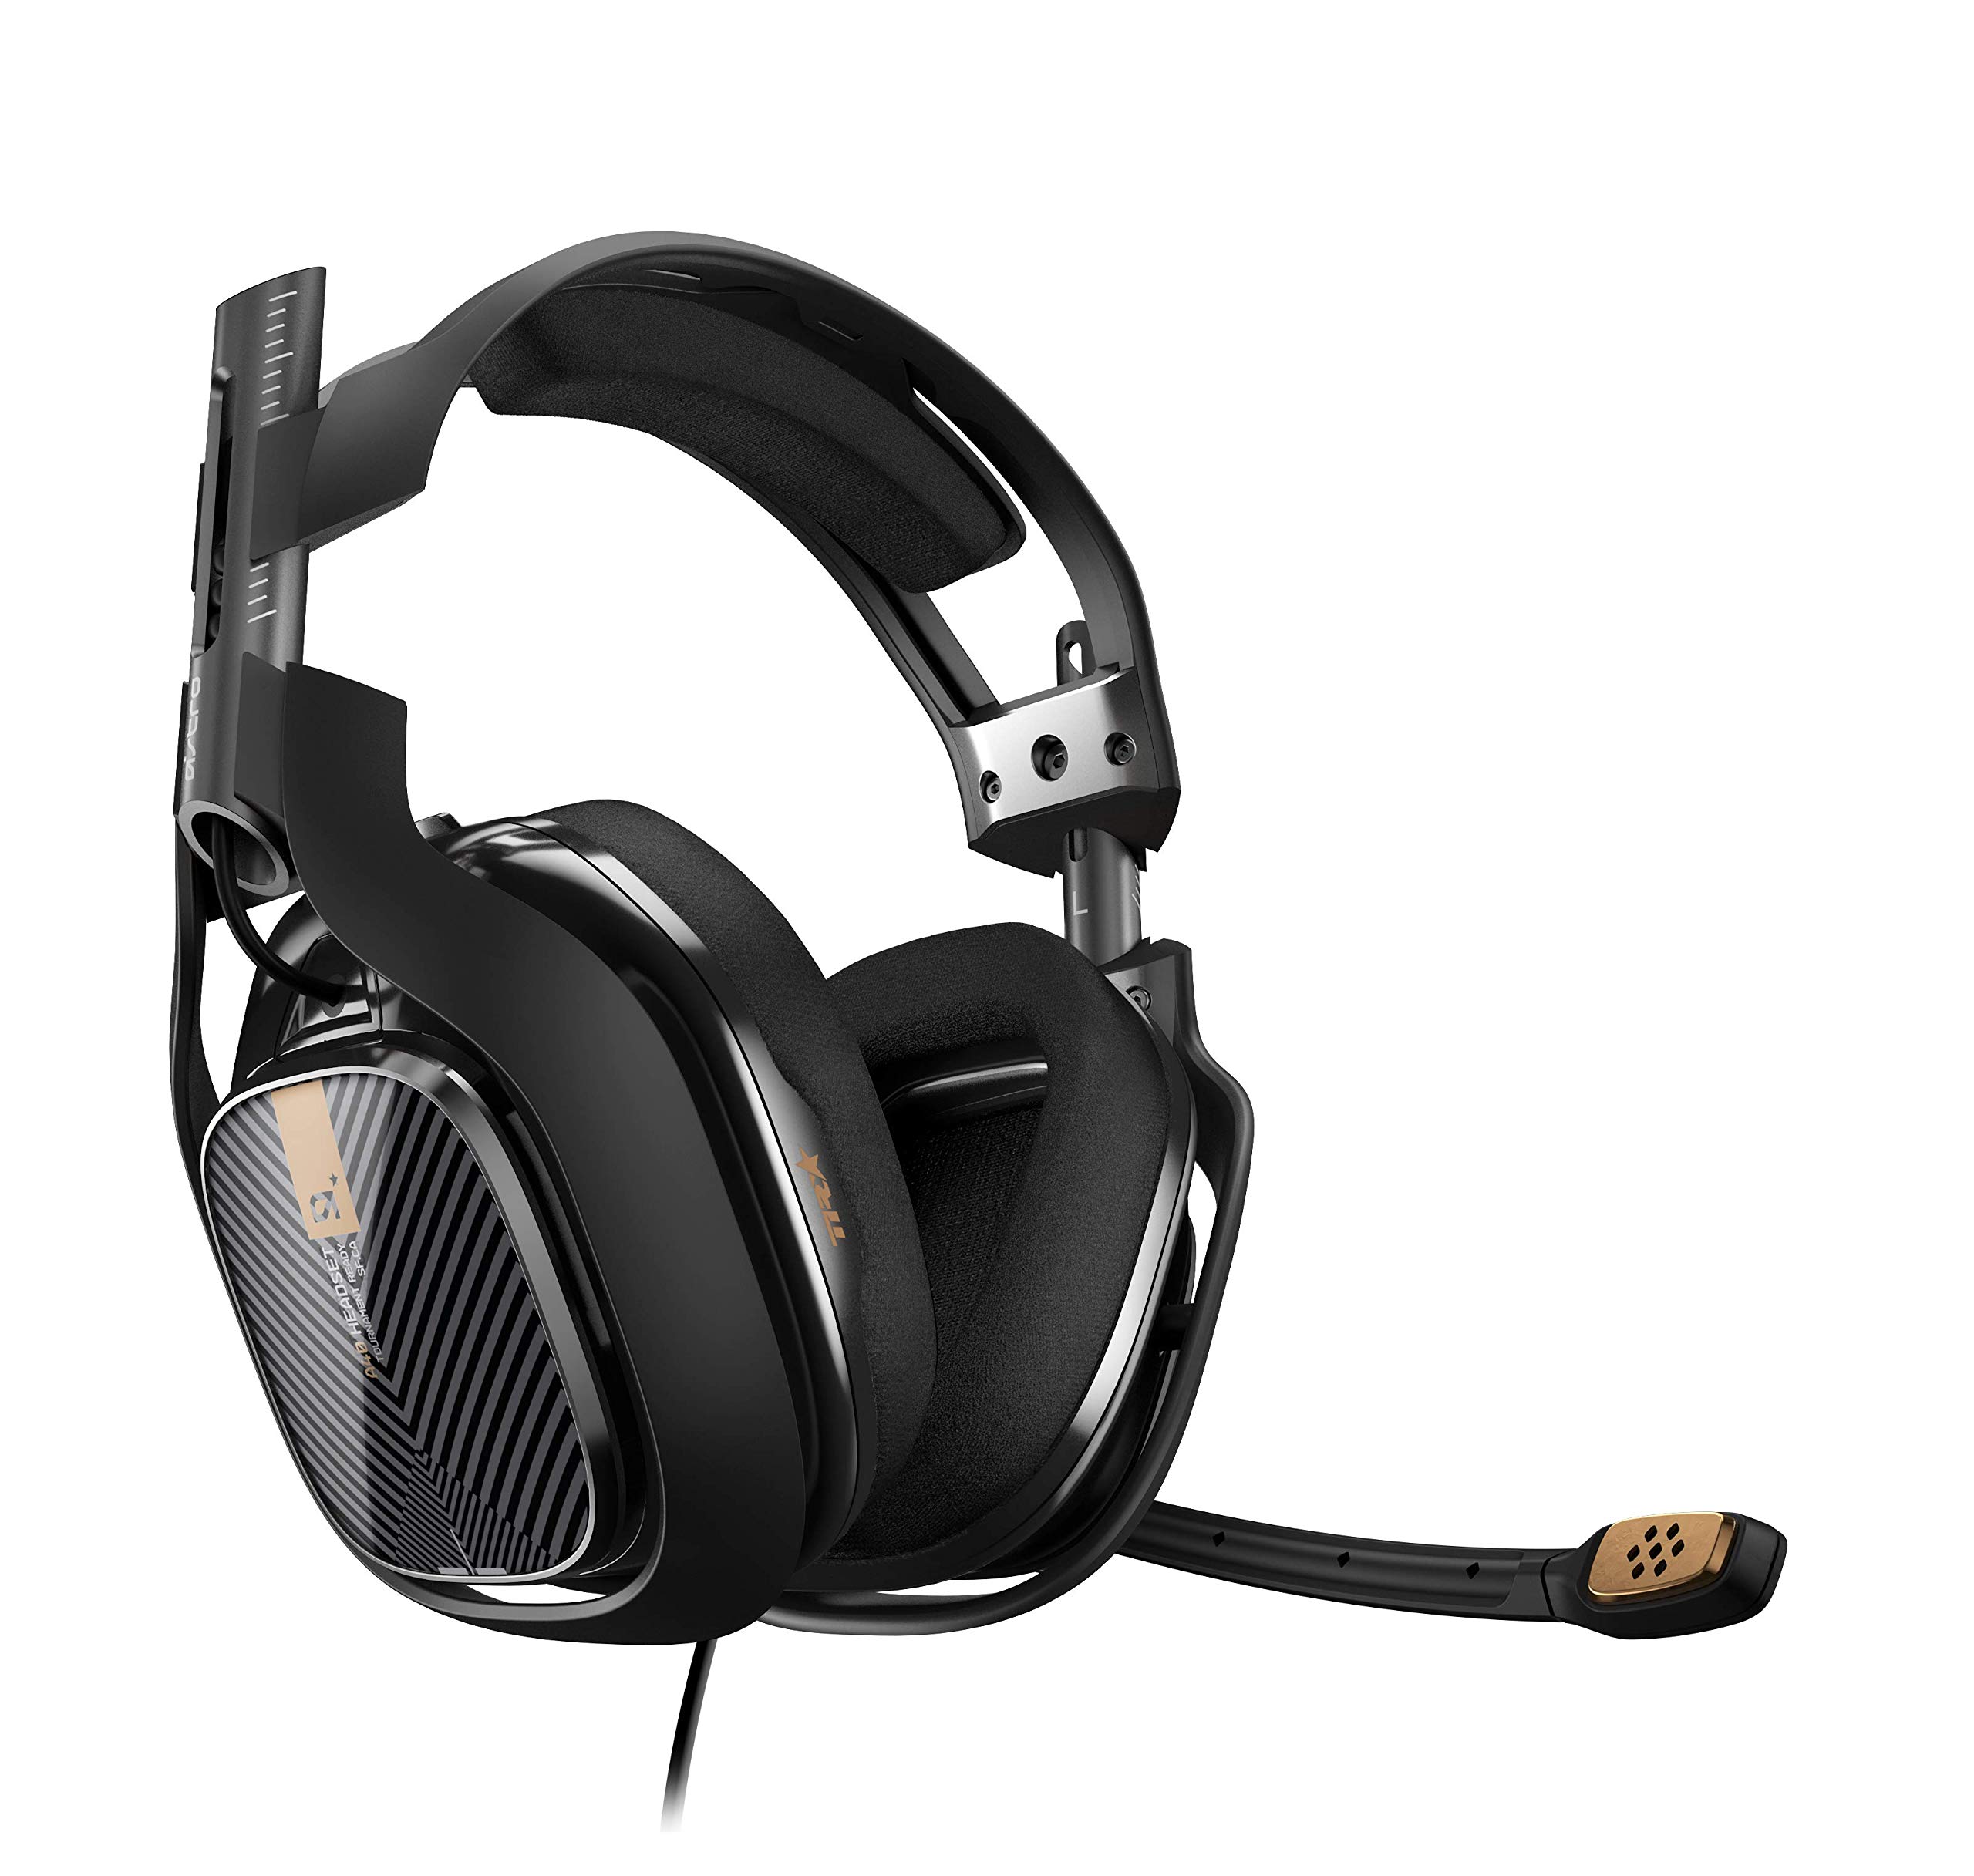 A40 TR HEADSET FOR PS4